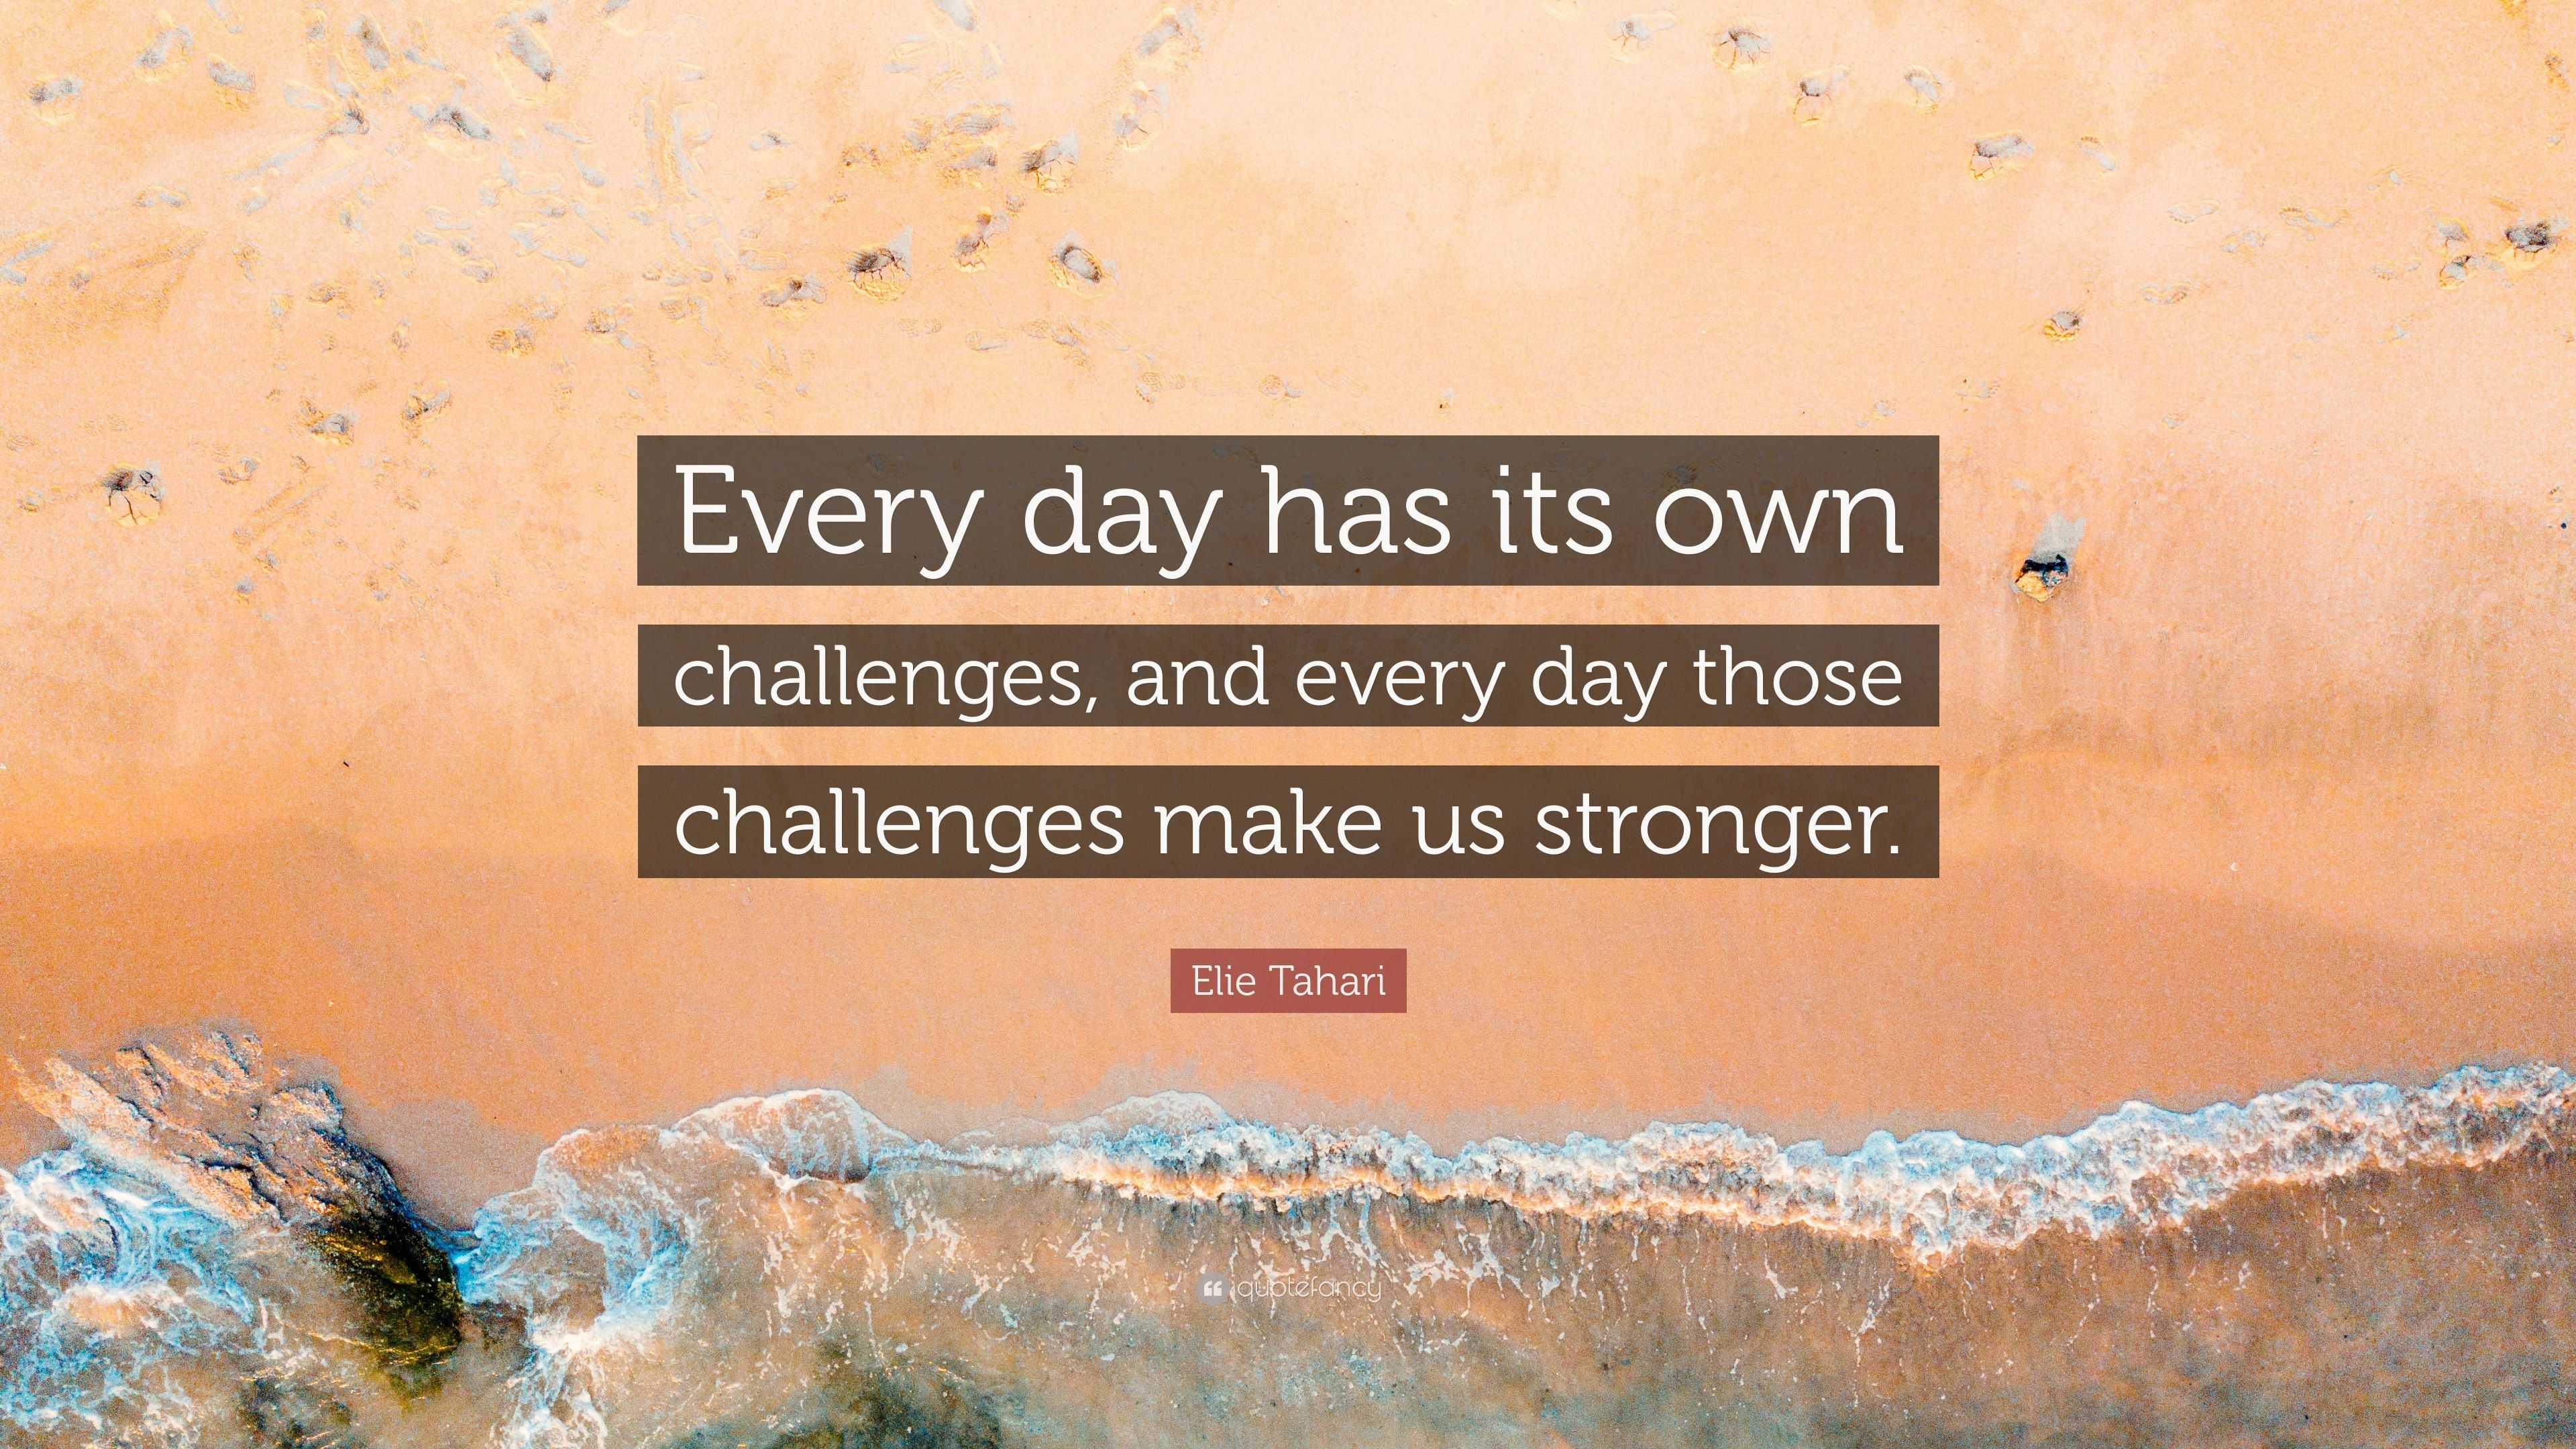 Elie Tahari Quote: “Every day has its own challenges, and every day